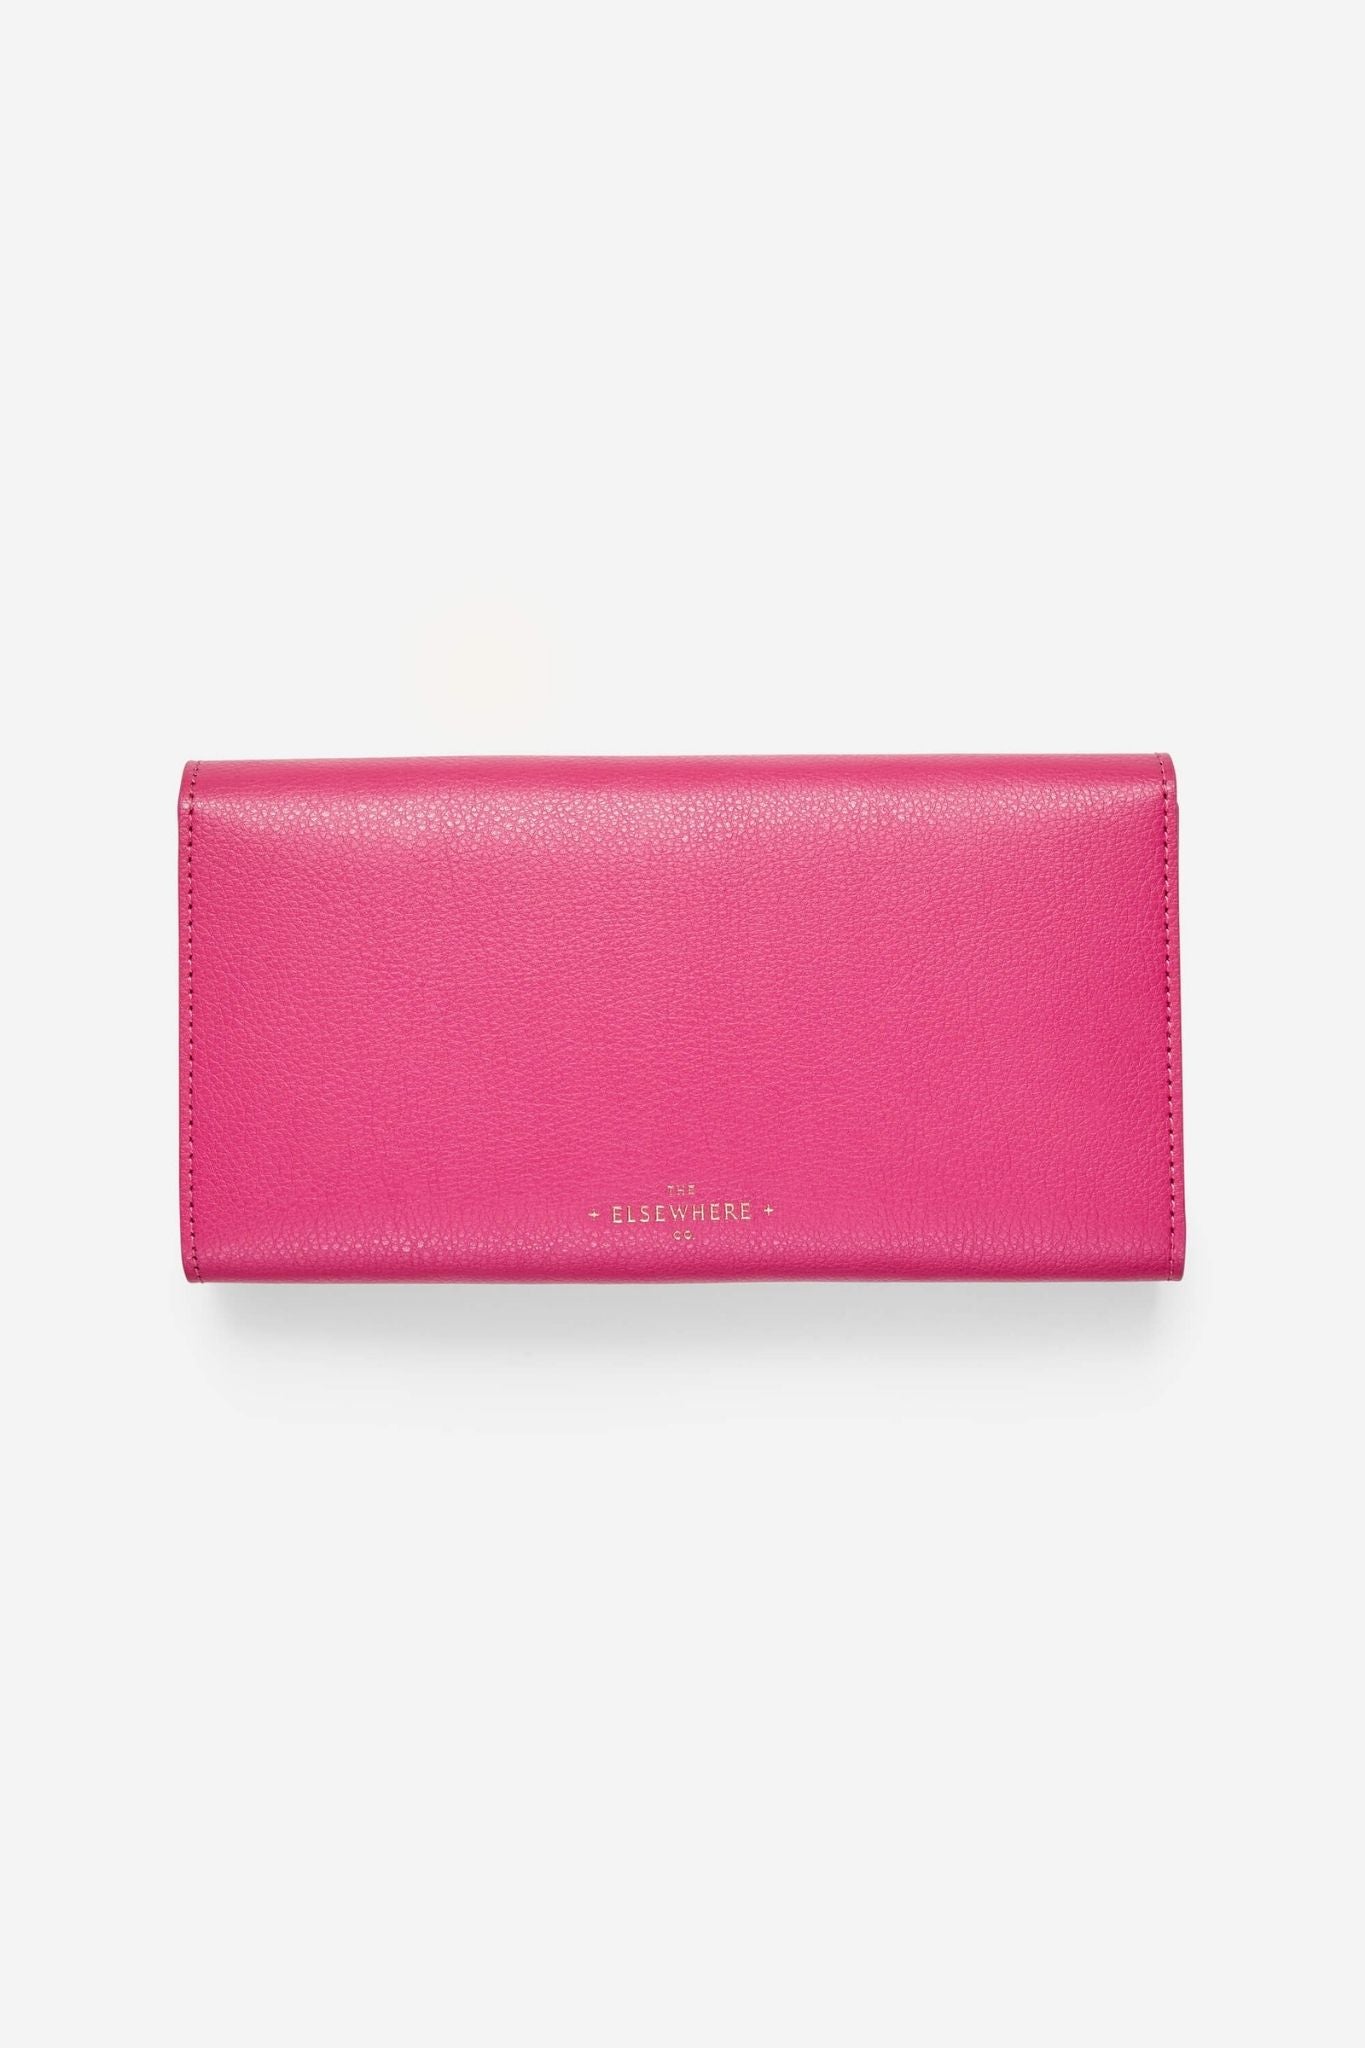 The Elsewhere Co  Leather Travel Wallet Pink – The Elsewhere Co.